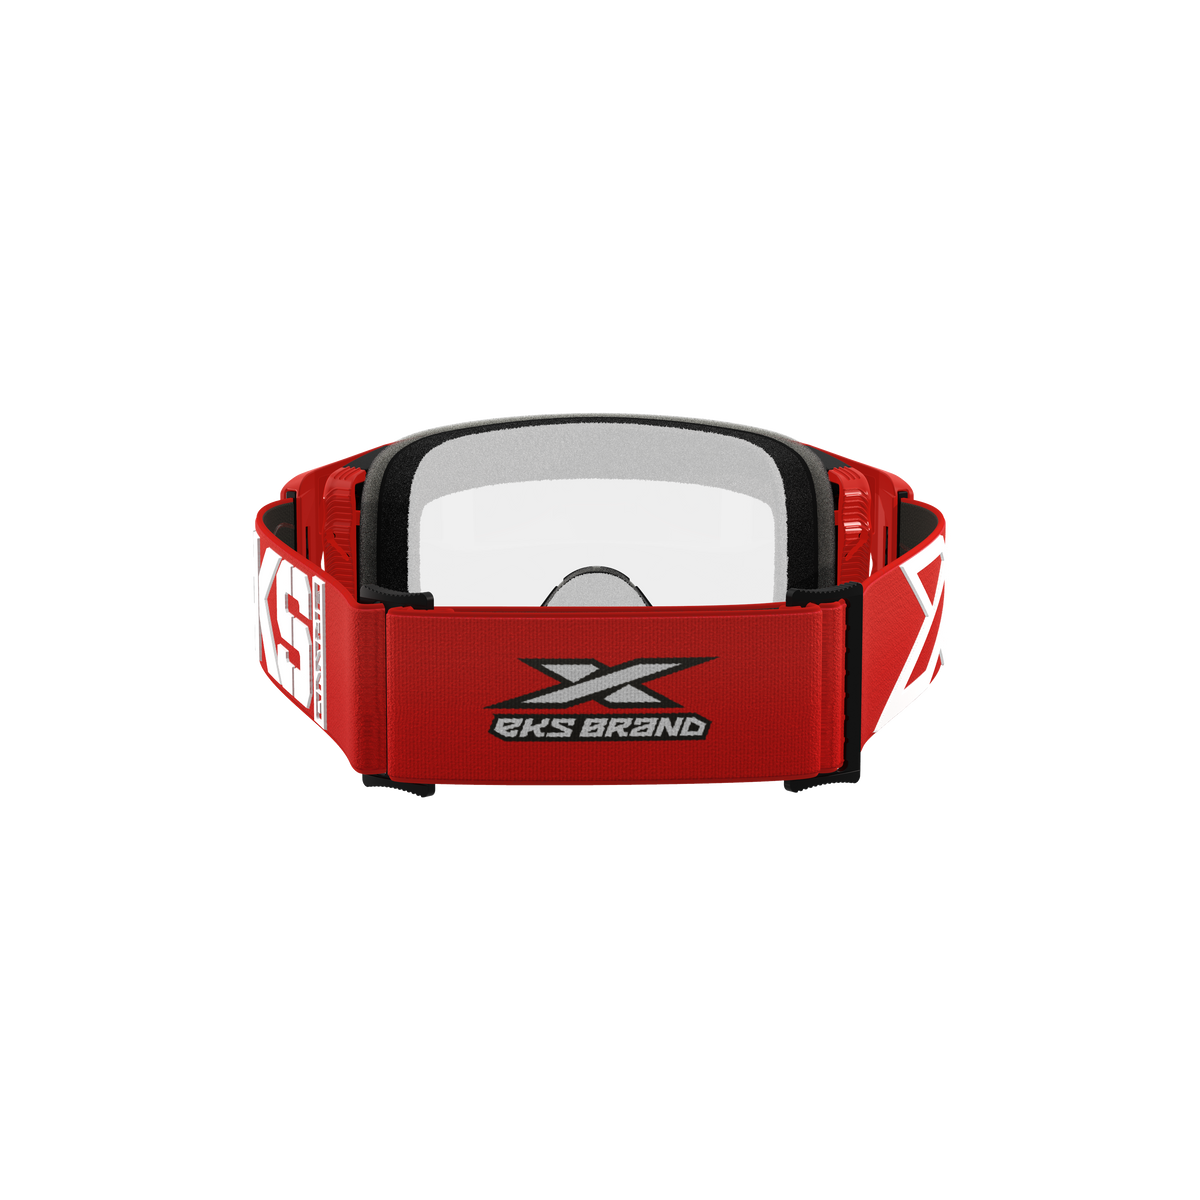 Lucid Race Face Goggle Caliber Red - Clear Lens